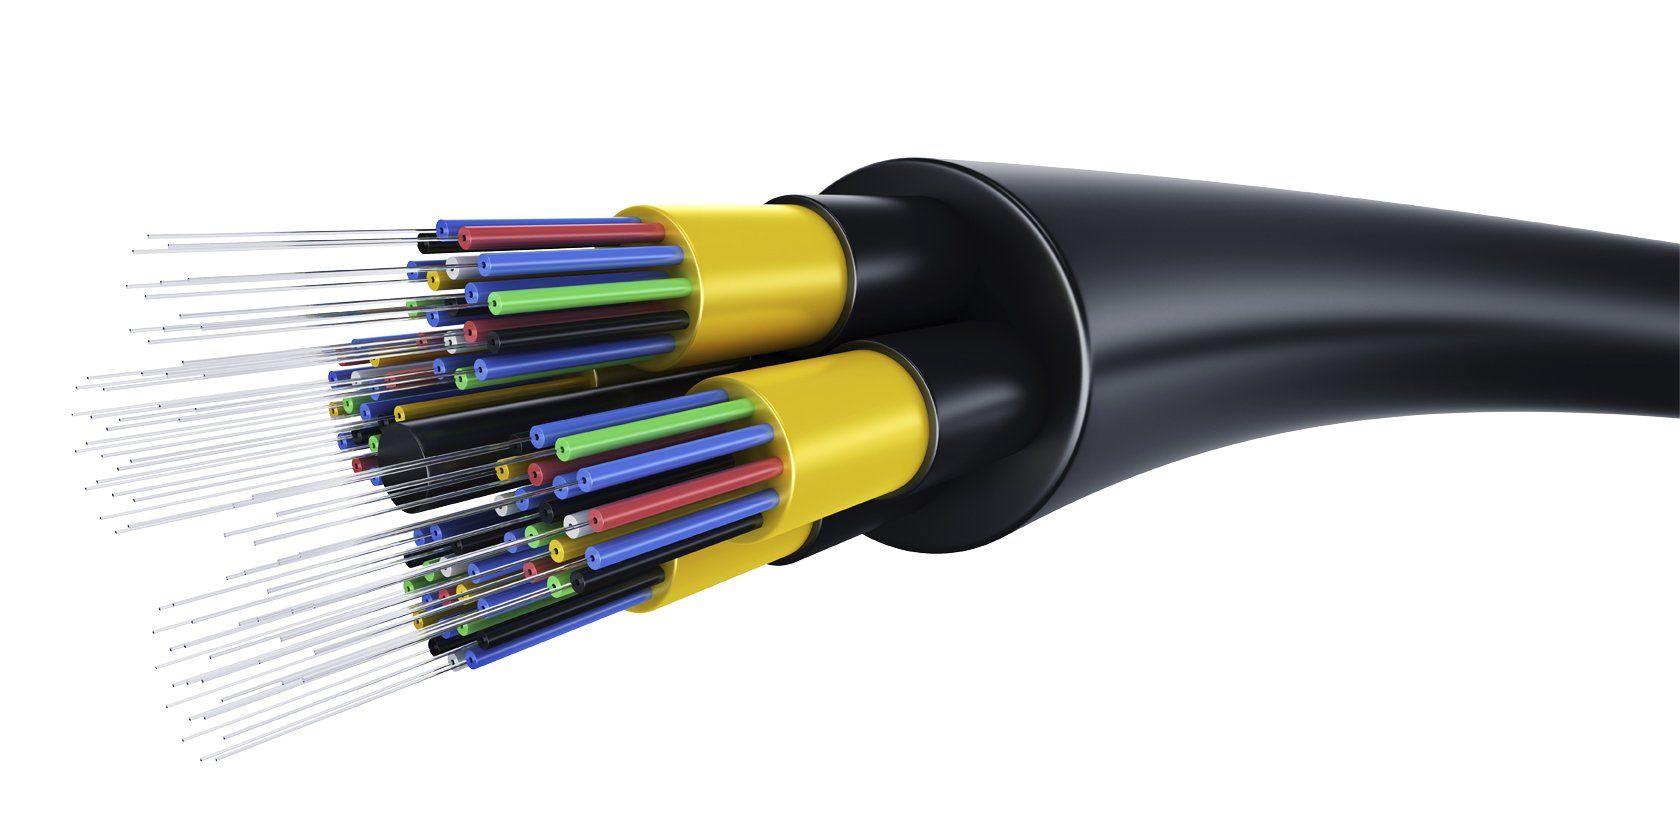 Structured Cabling Systems - WI